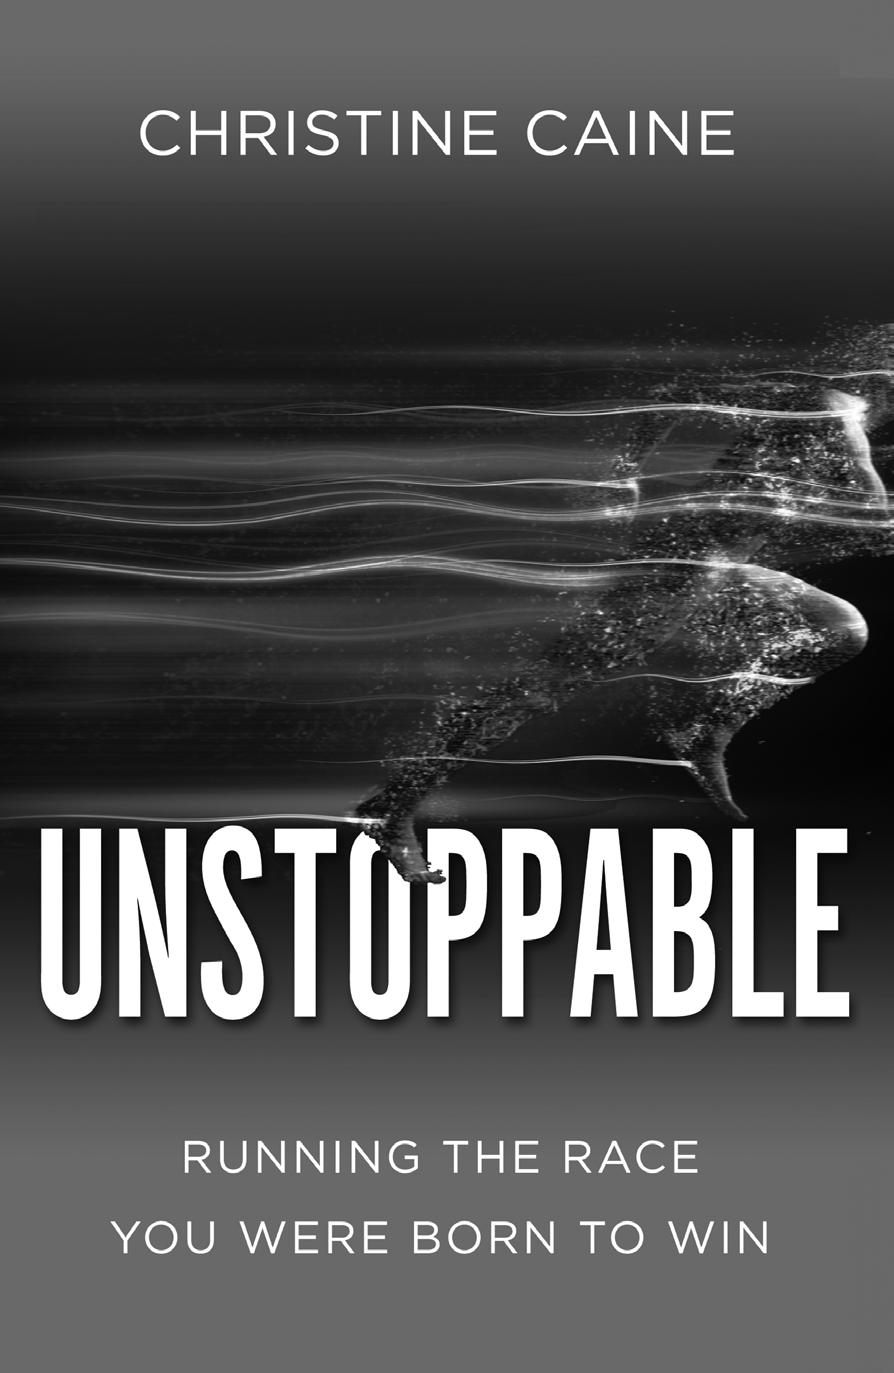 Unstoppable Running the Race You Were Born To Win Christine Caine Each of us has a race to run in life. But this is a different kind of race.